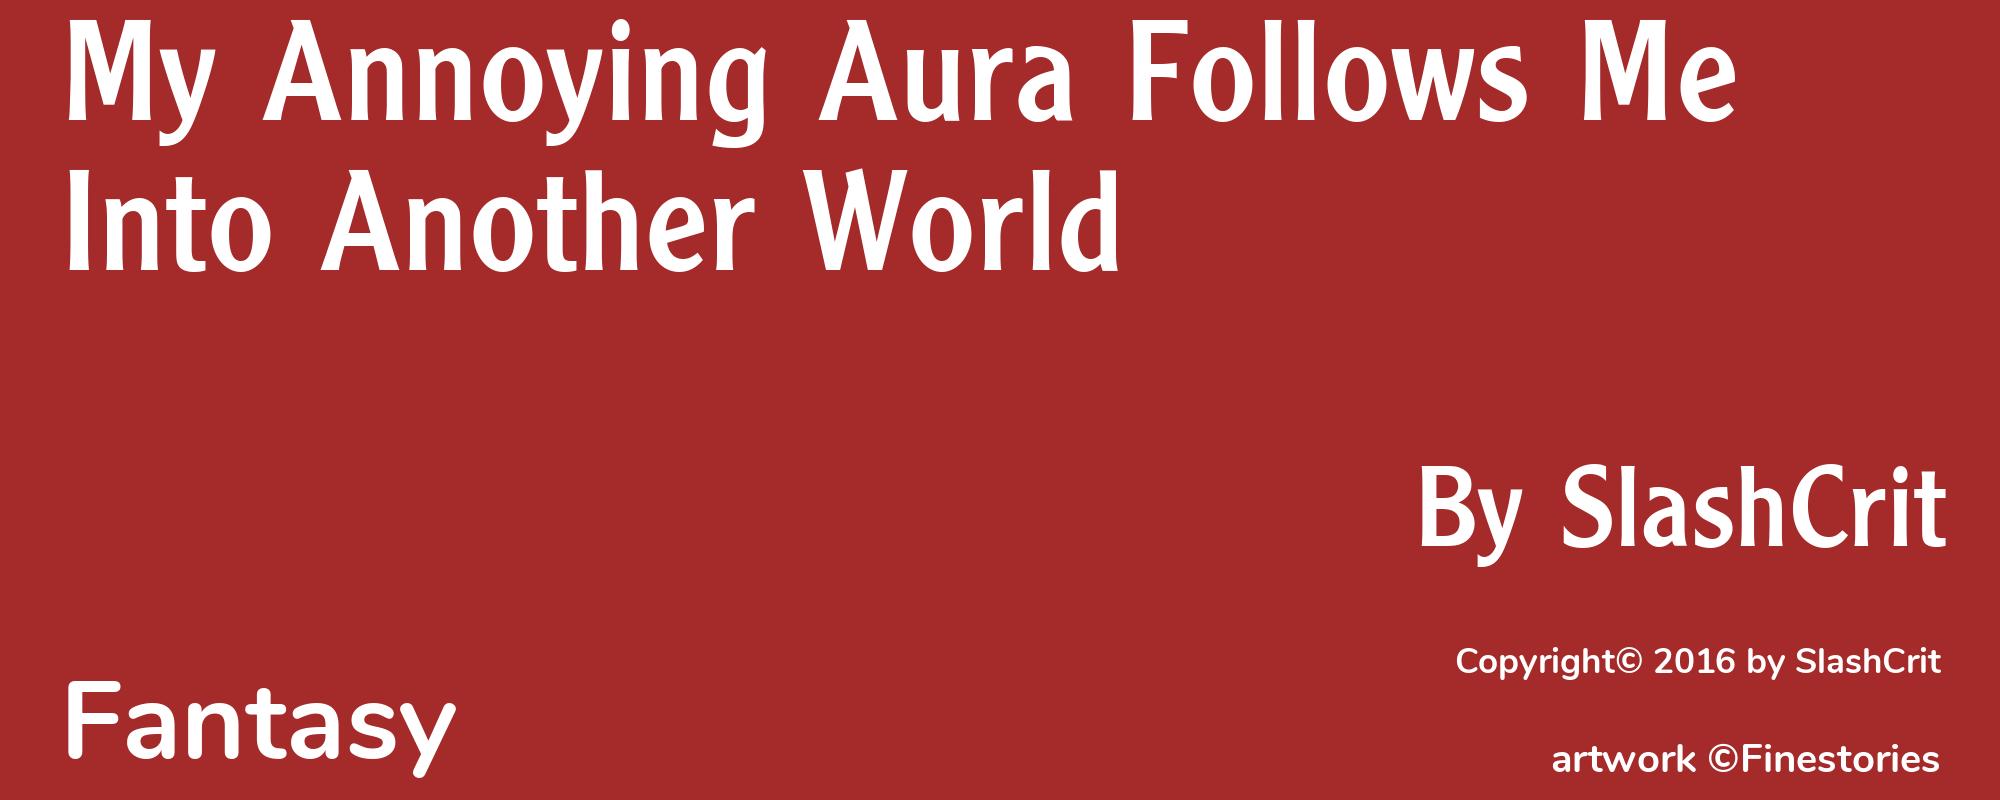 My Annoying Aura Follows Me Into Another World - Cover